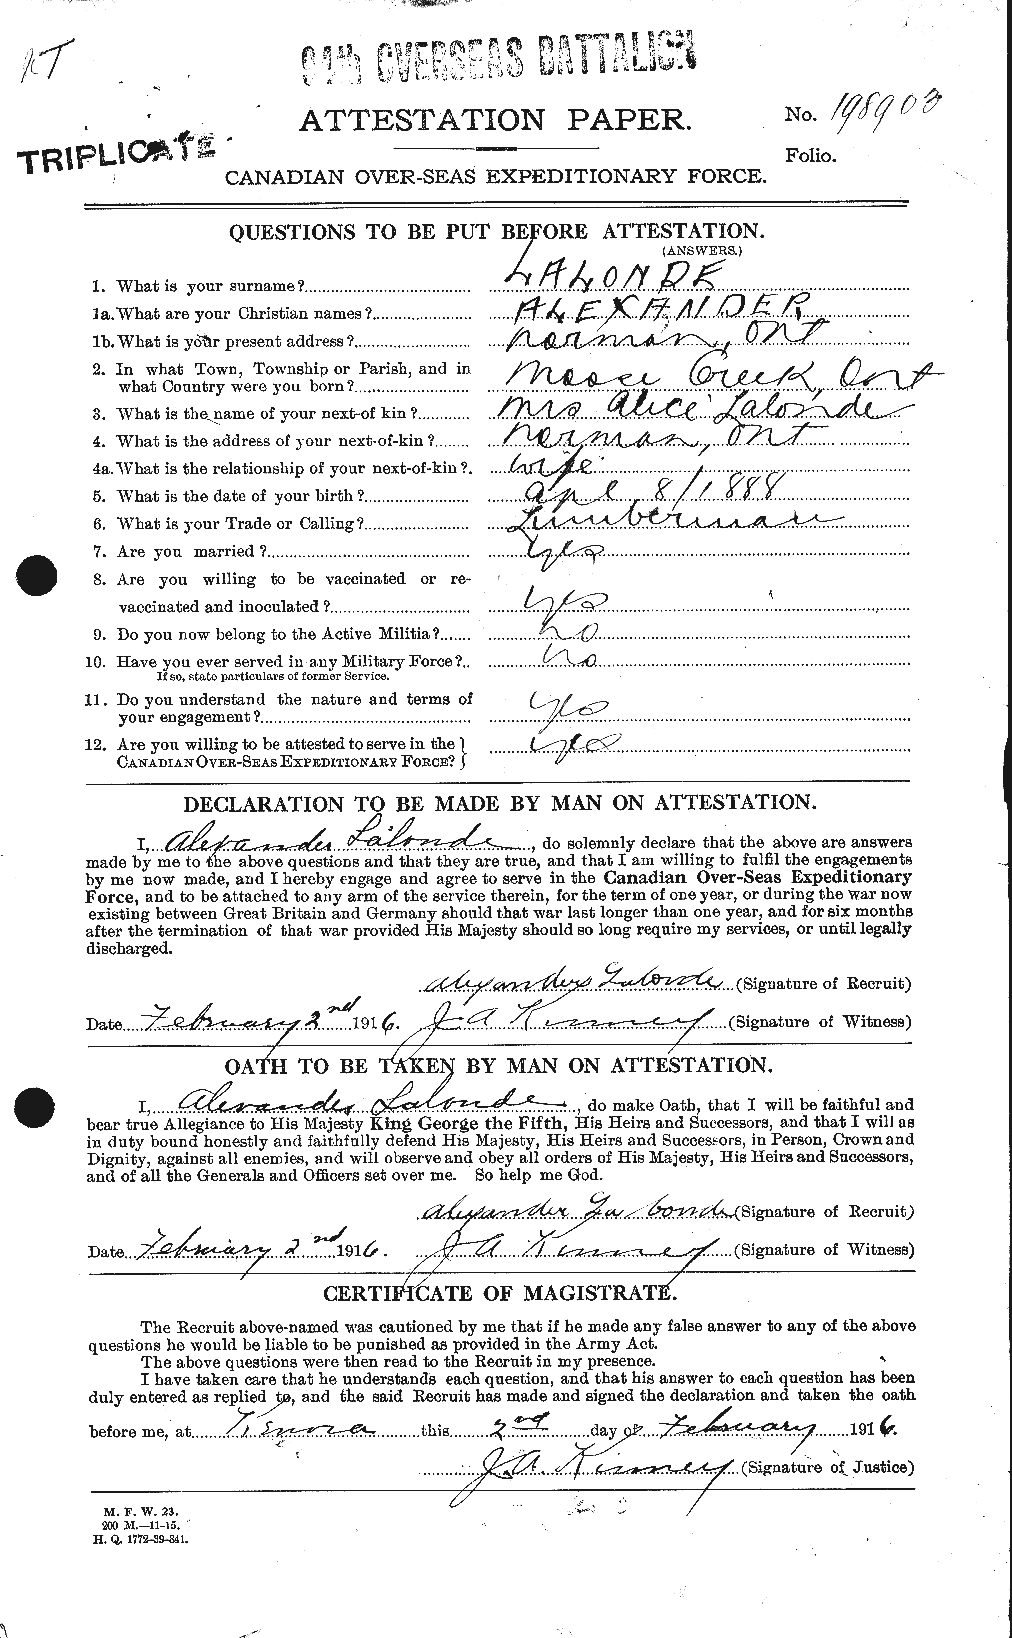 Personnel Records of the First World War - CEF 443479a